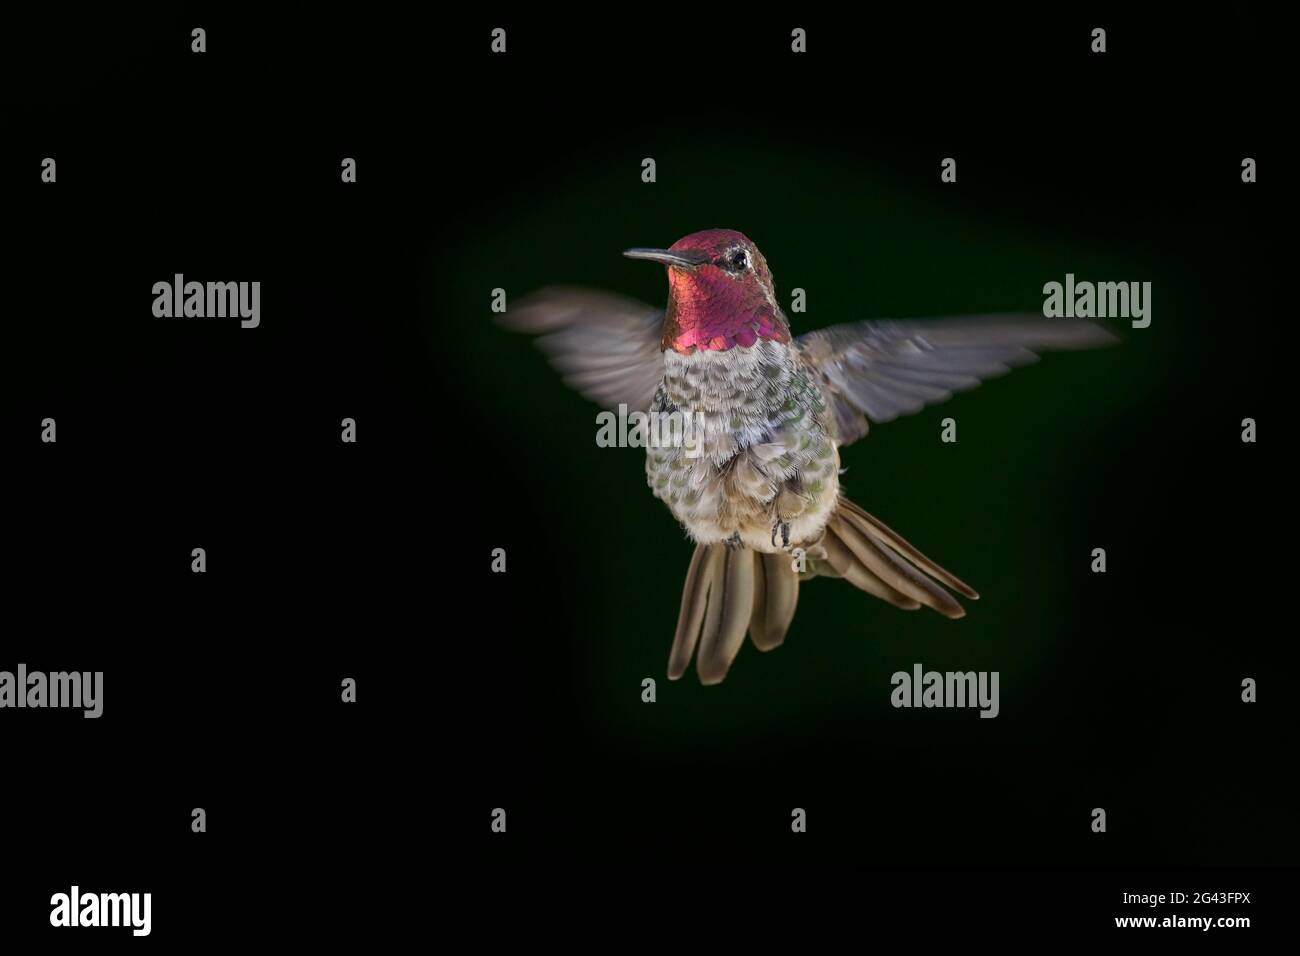 male Anna's Hummingbird (Calypte anna) aggression display to keep other hummingbirds away from food source. Stock Photo